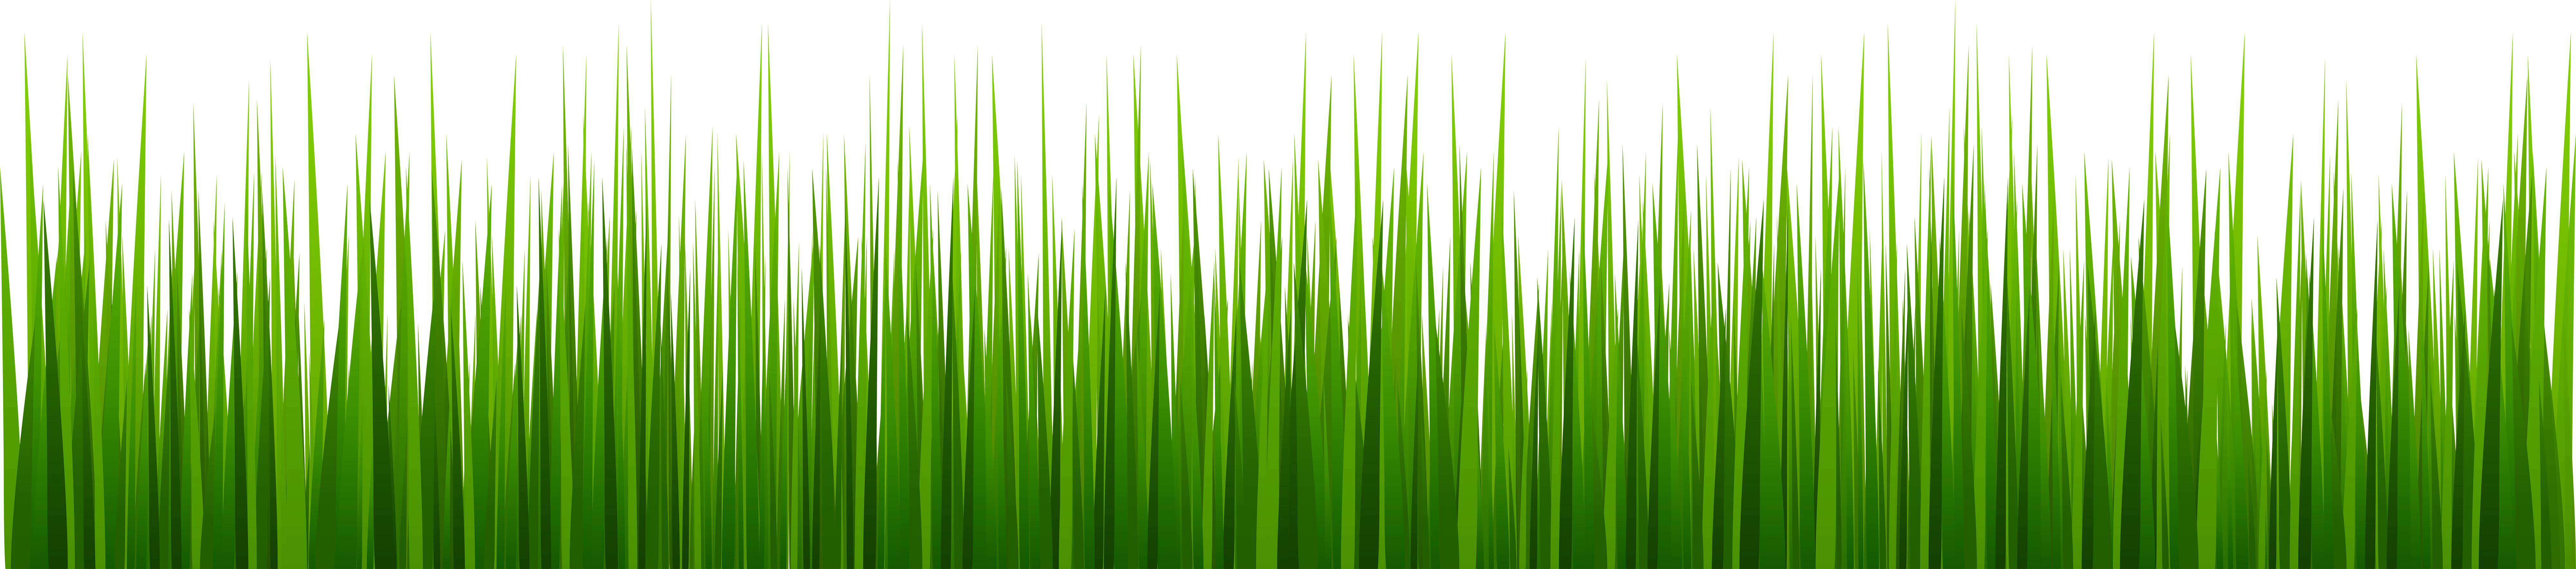 png clipart grass - photo #10